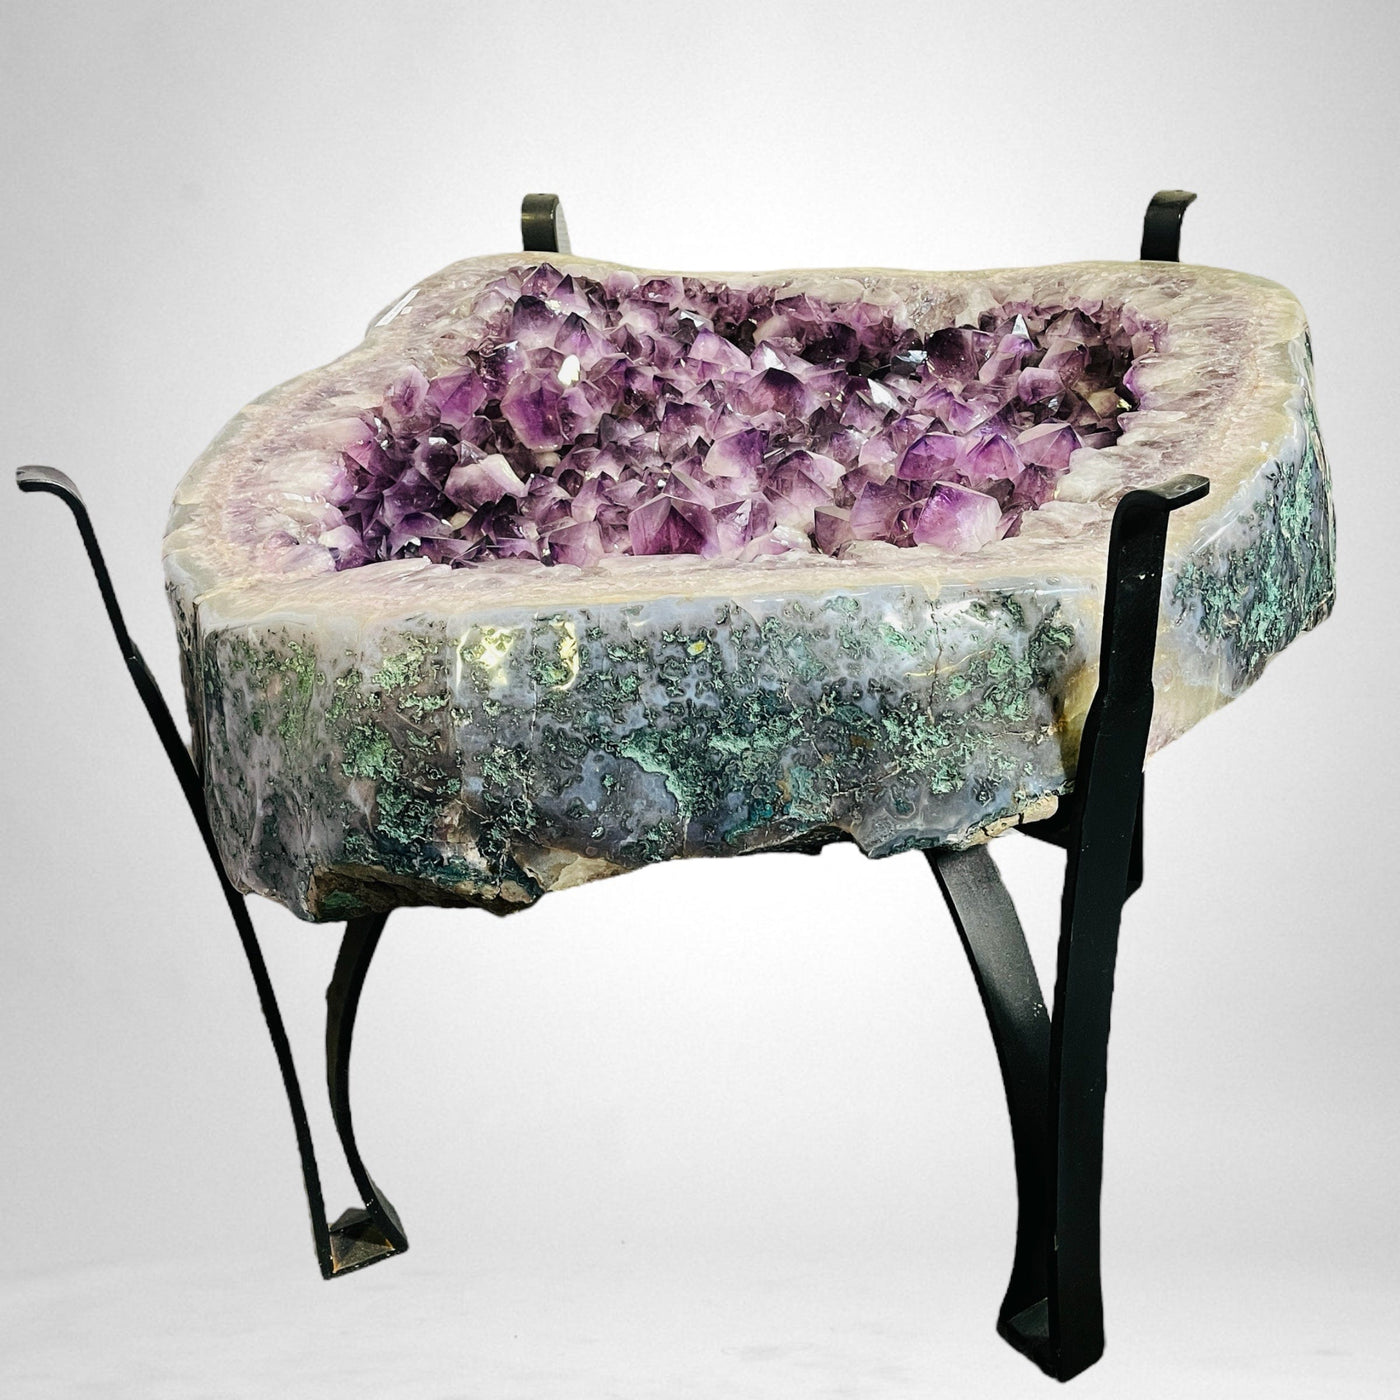 Amethyst Crystal Cluster Geode Table on Metal Base on white background